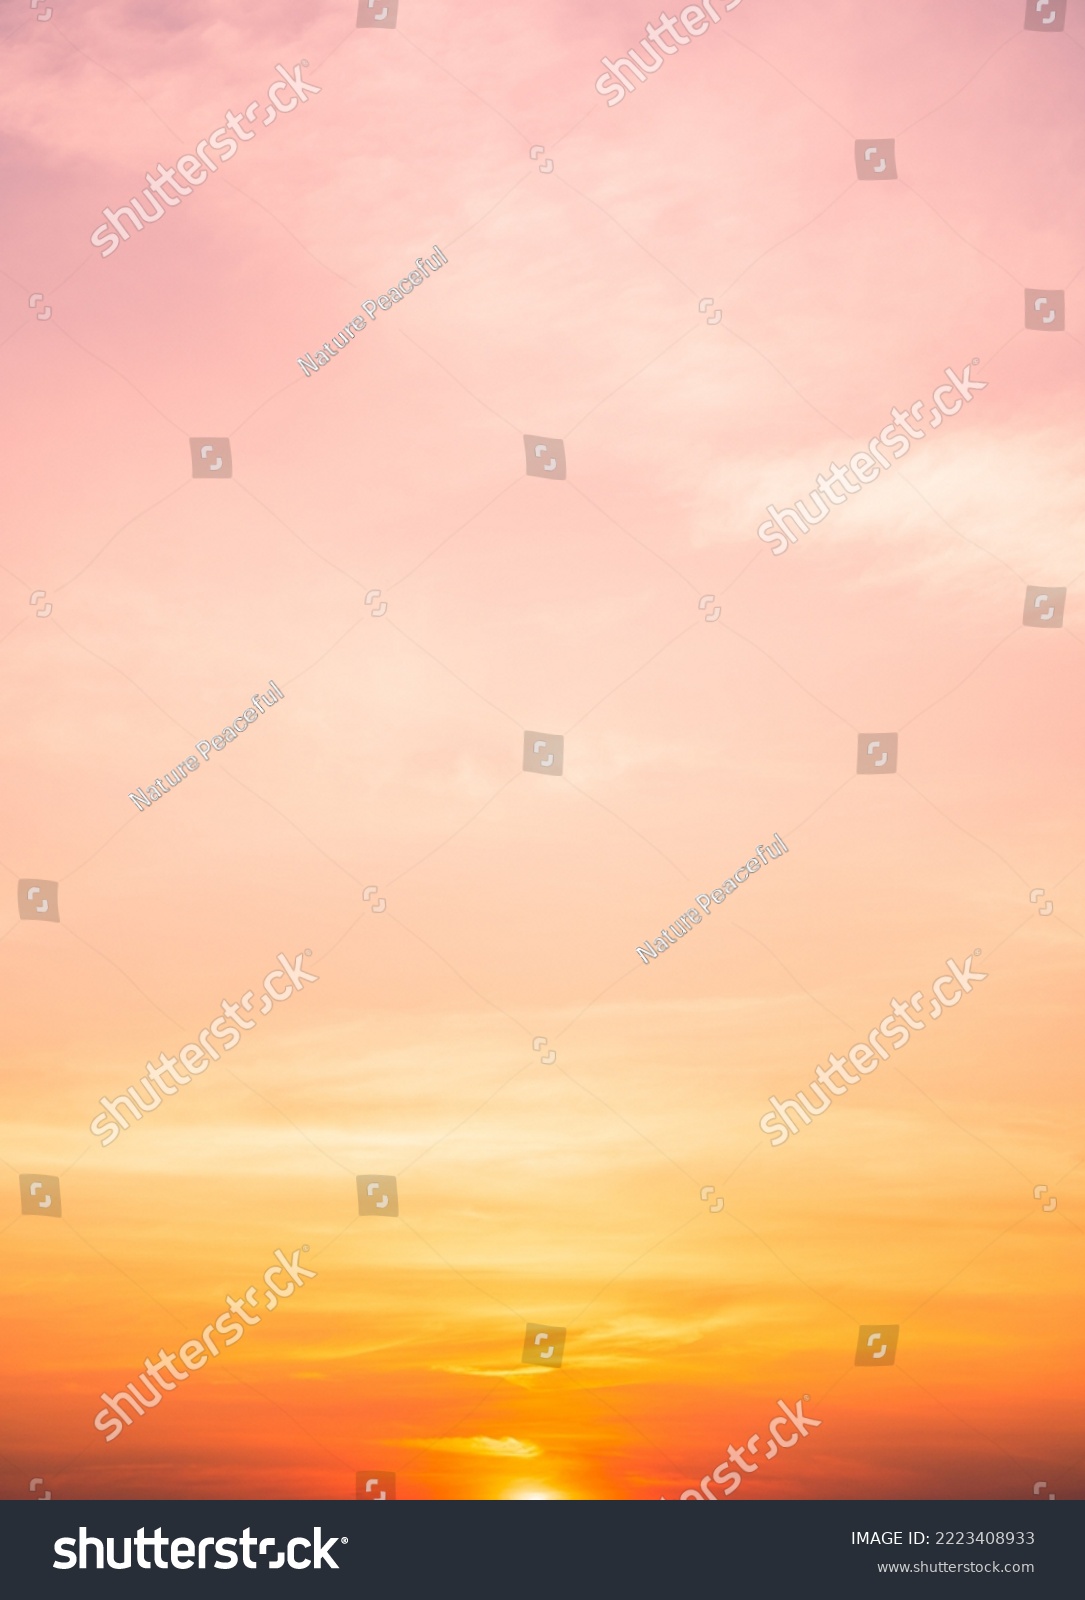 Orange Summer Sky Vertical, Sunset in the Evening, Romantic Golden Hour sunshine Pink, Red and Yellow Sunlight sky Backgrounds  #2223408933